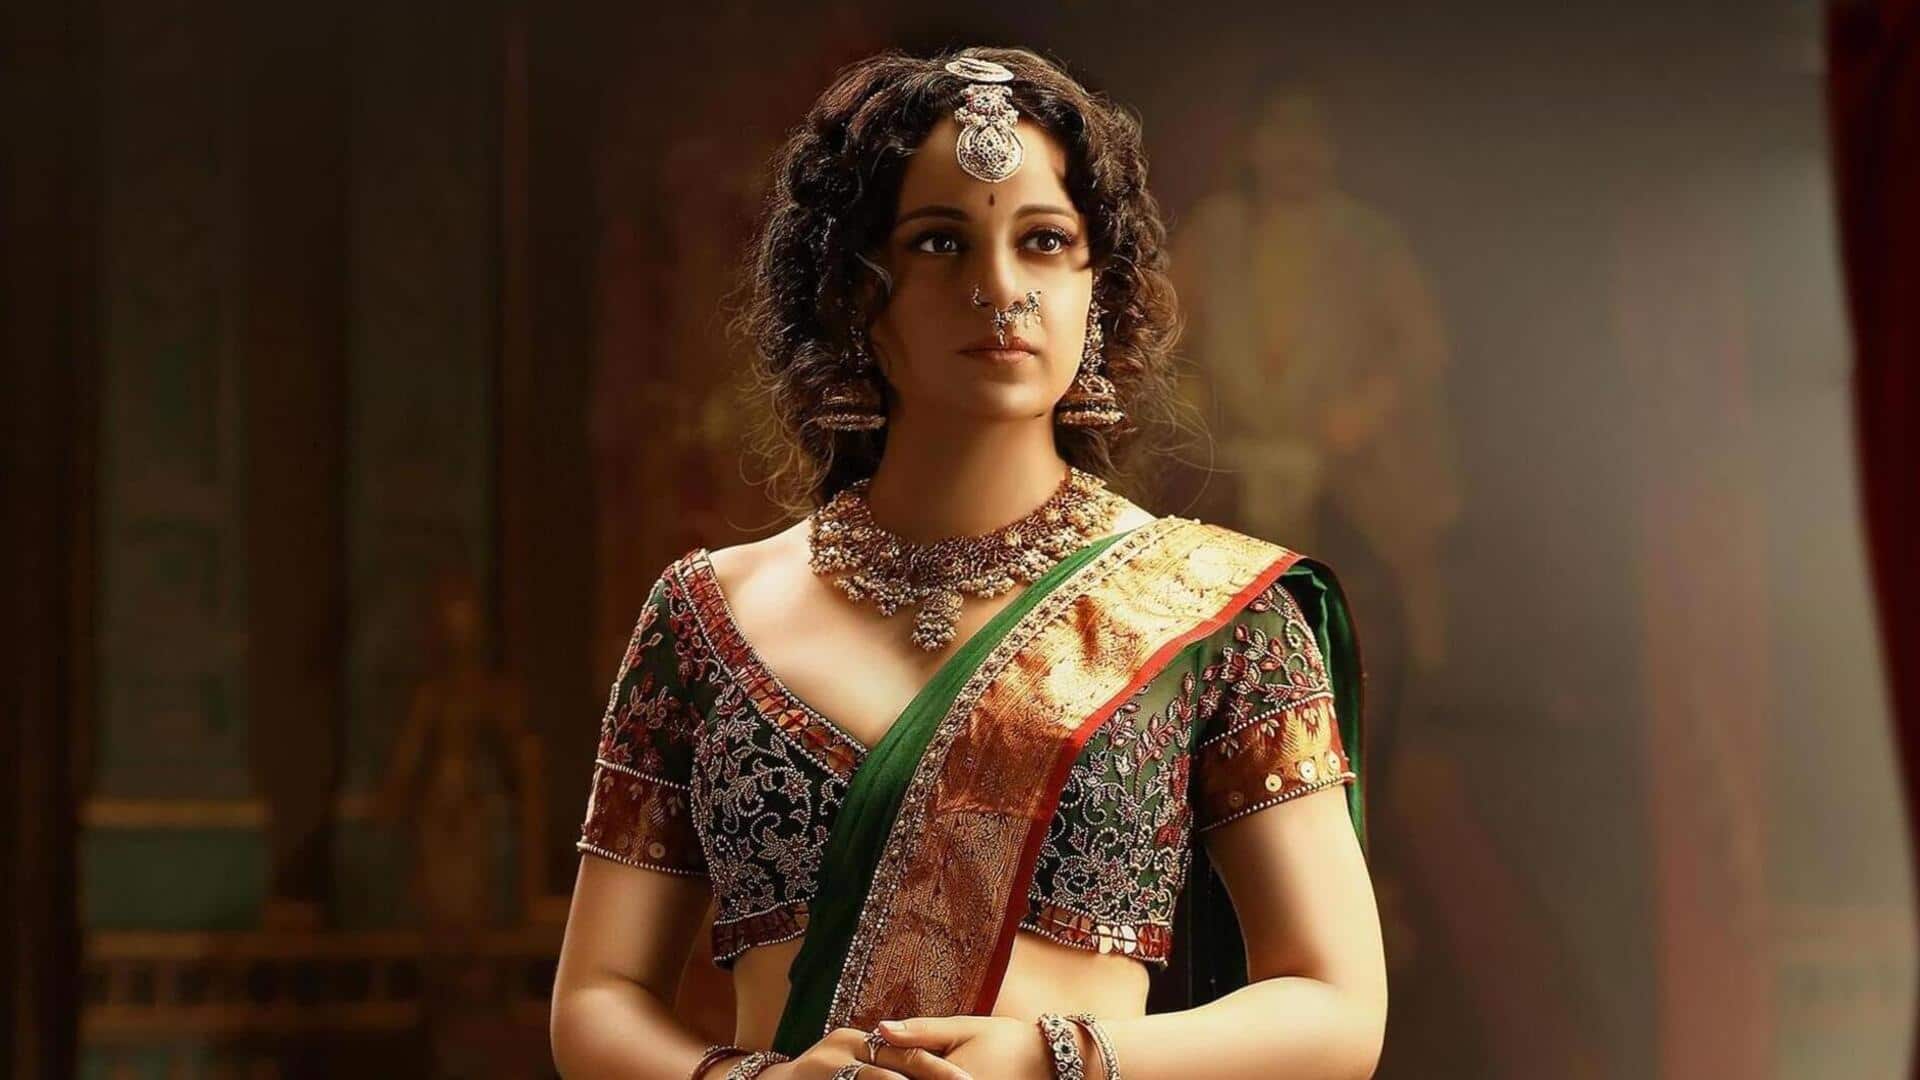 'Chandramukhi 2' trailer: Watch out for Kangana Ranaut's spooky glimpses